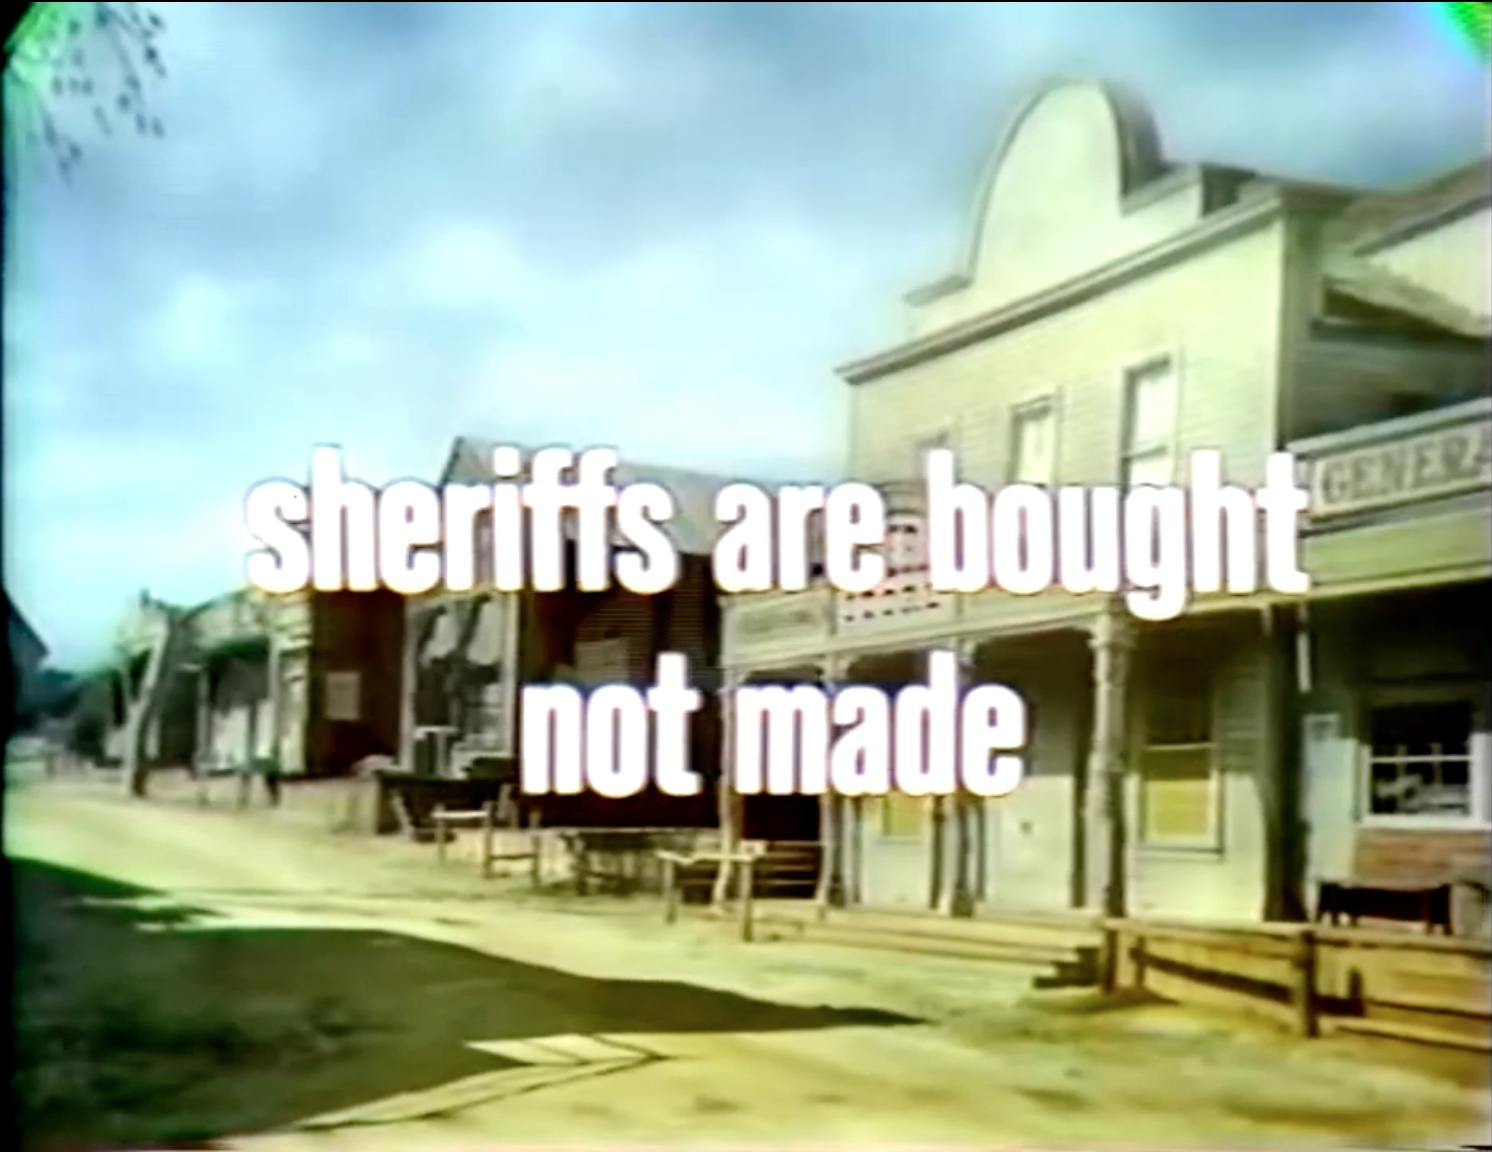 Sheriffs Are Bought Not Made - The Red Skelton Hour, season 17, with Burl Ives and Lulu